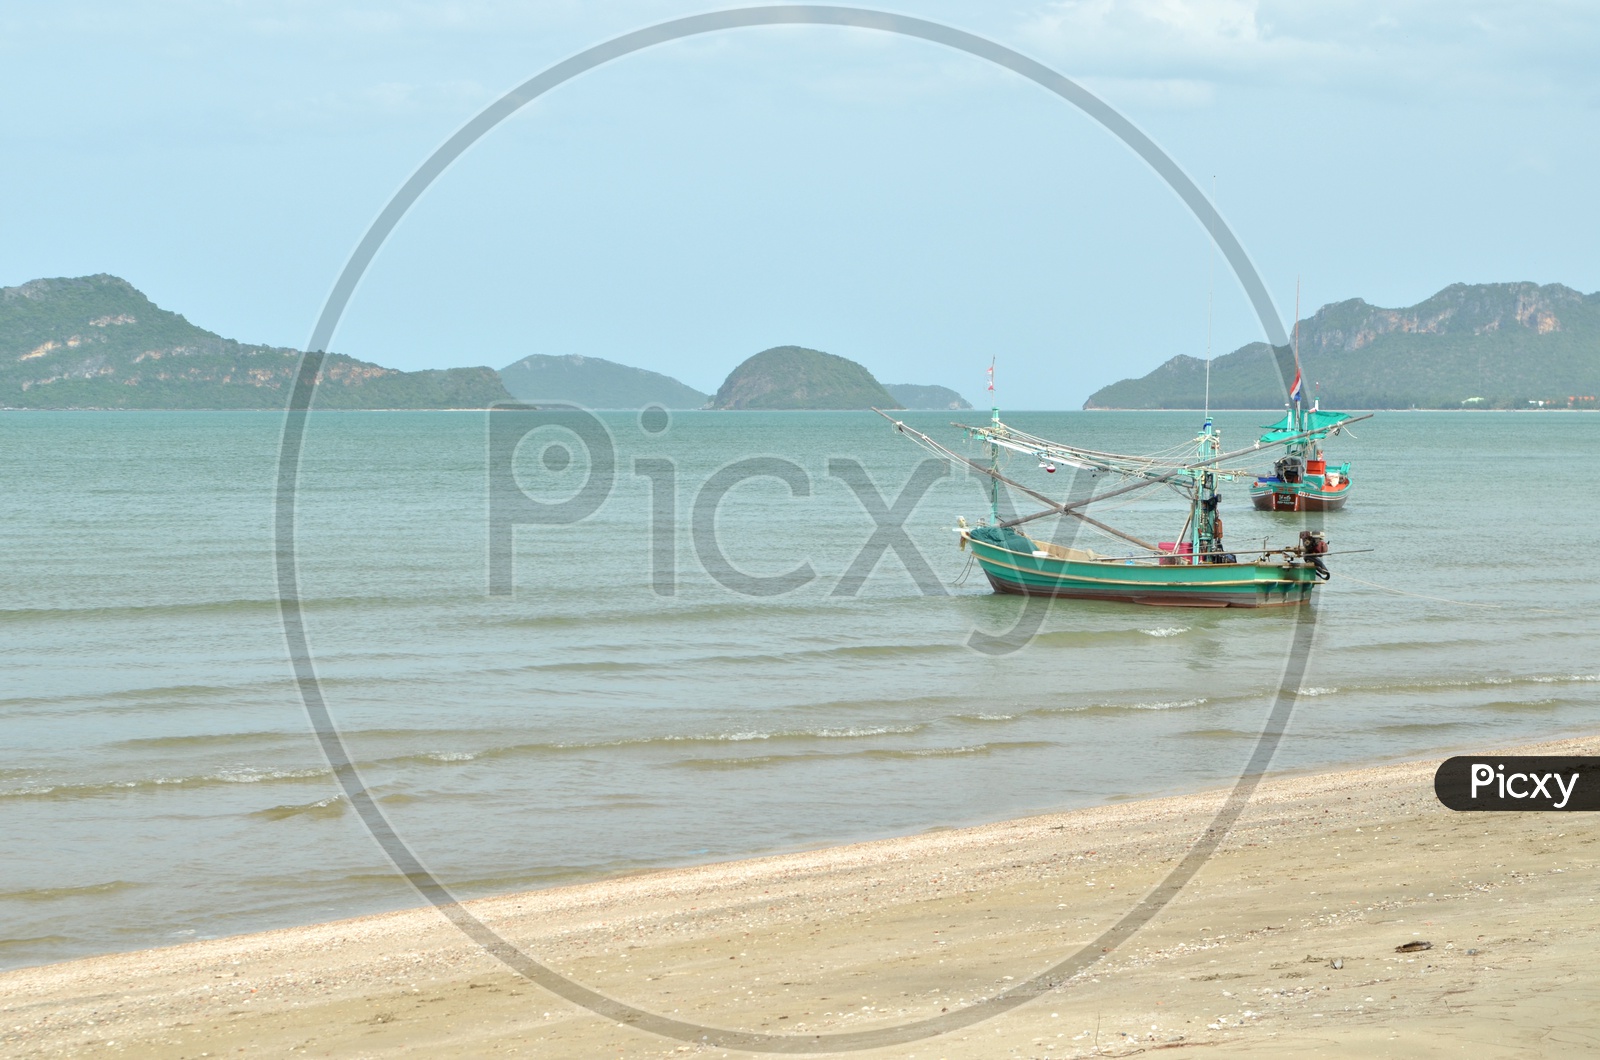 Trawler Boat Or Fishing Boat on a Beach Waters